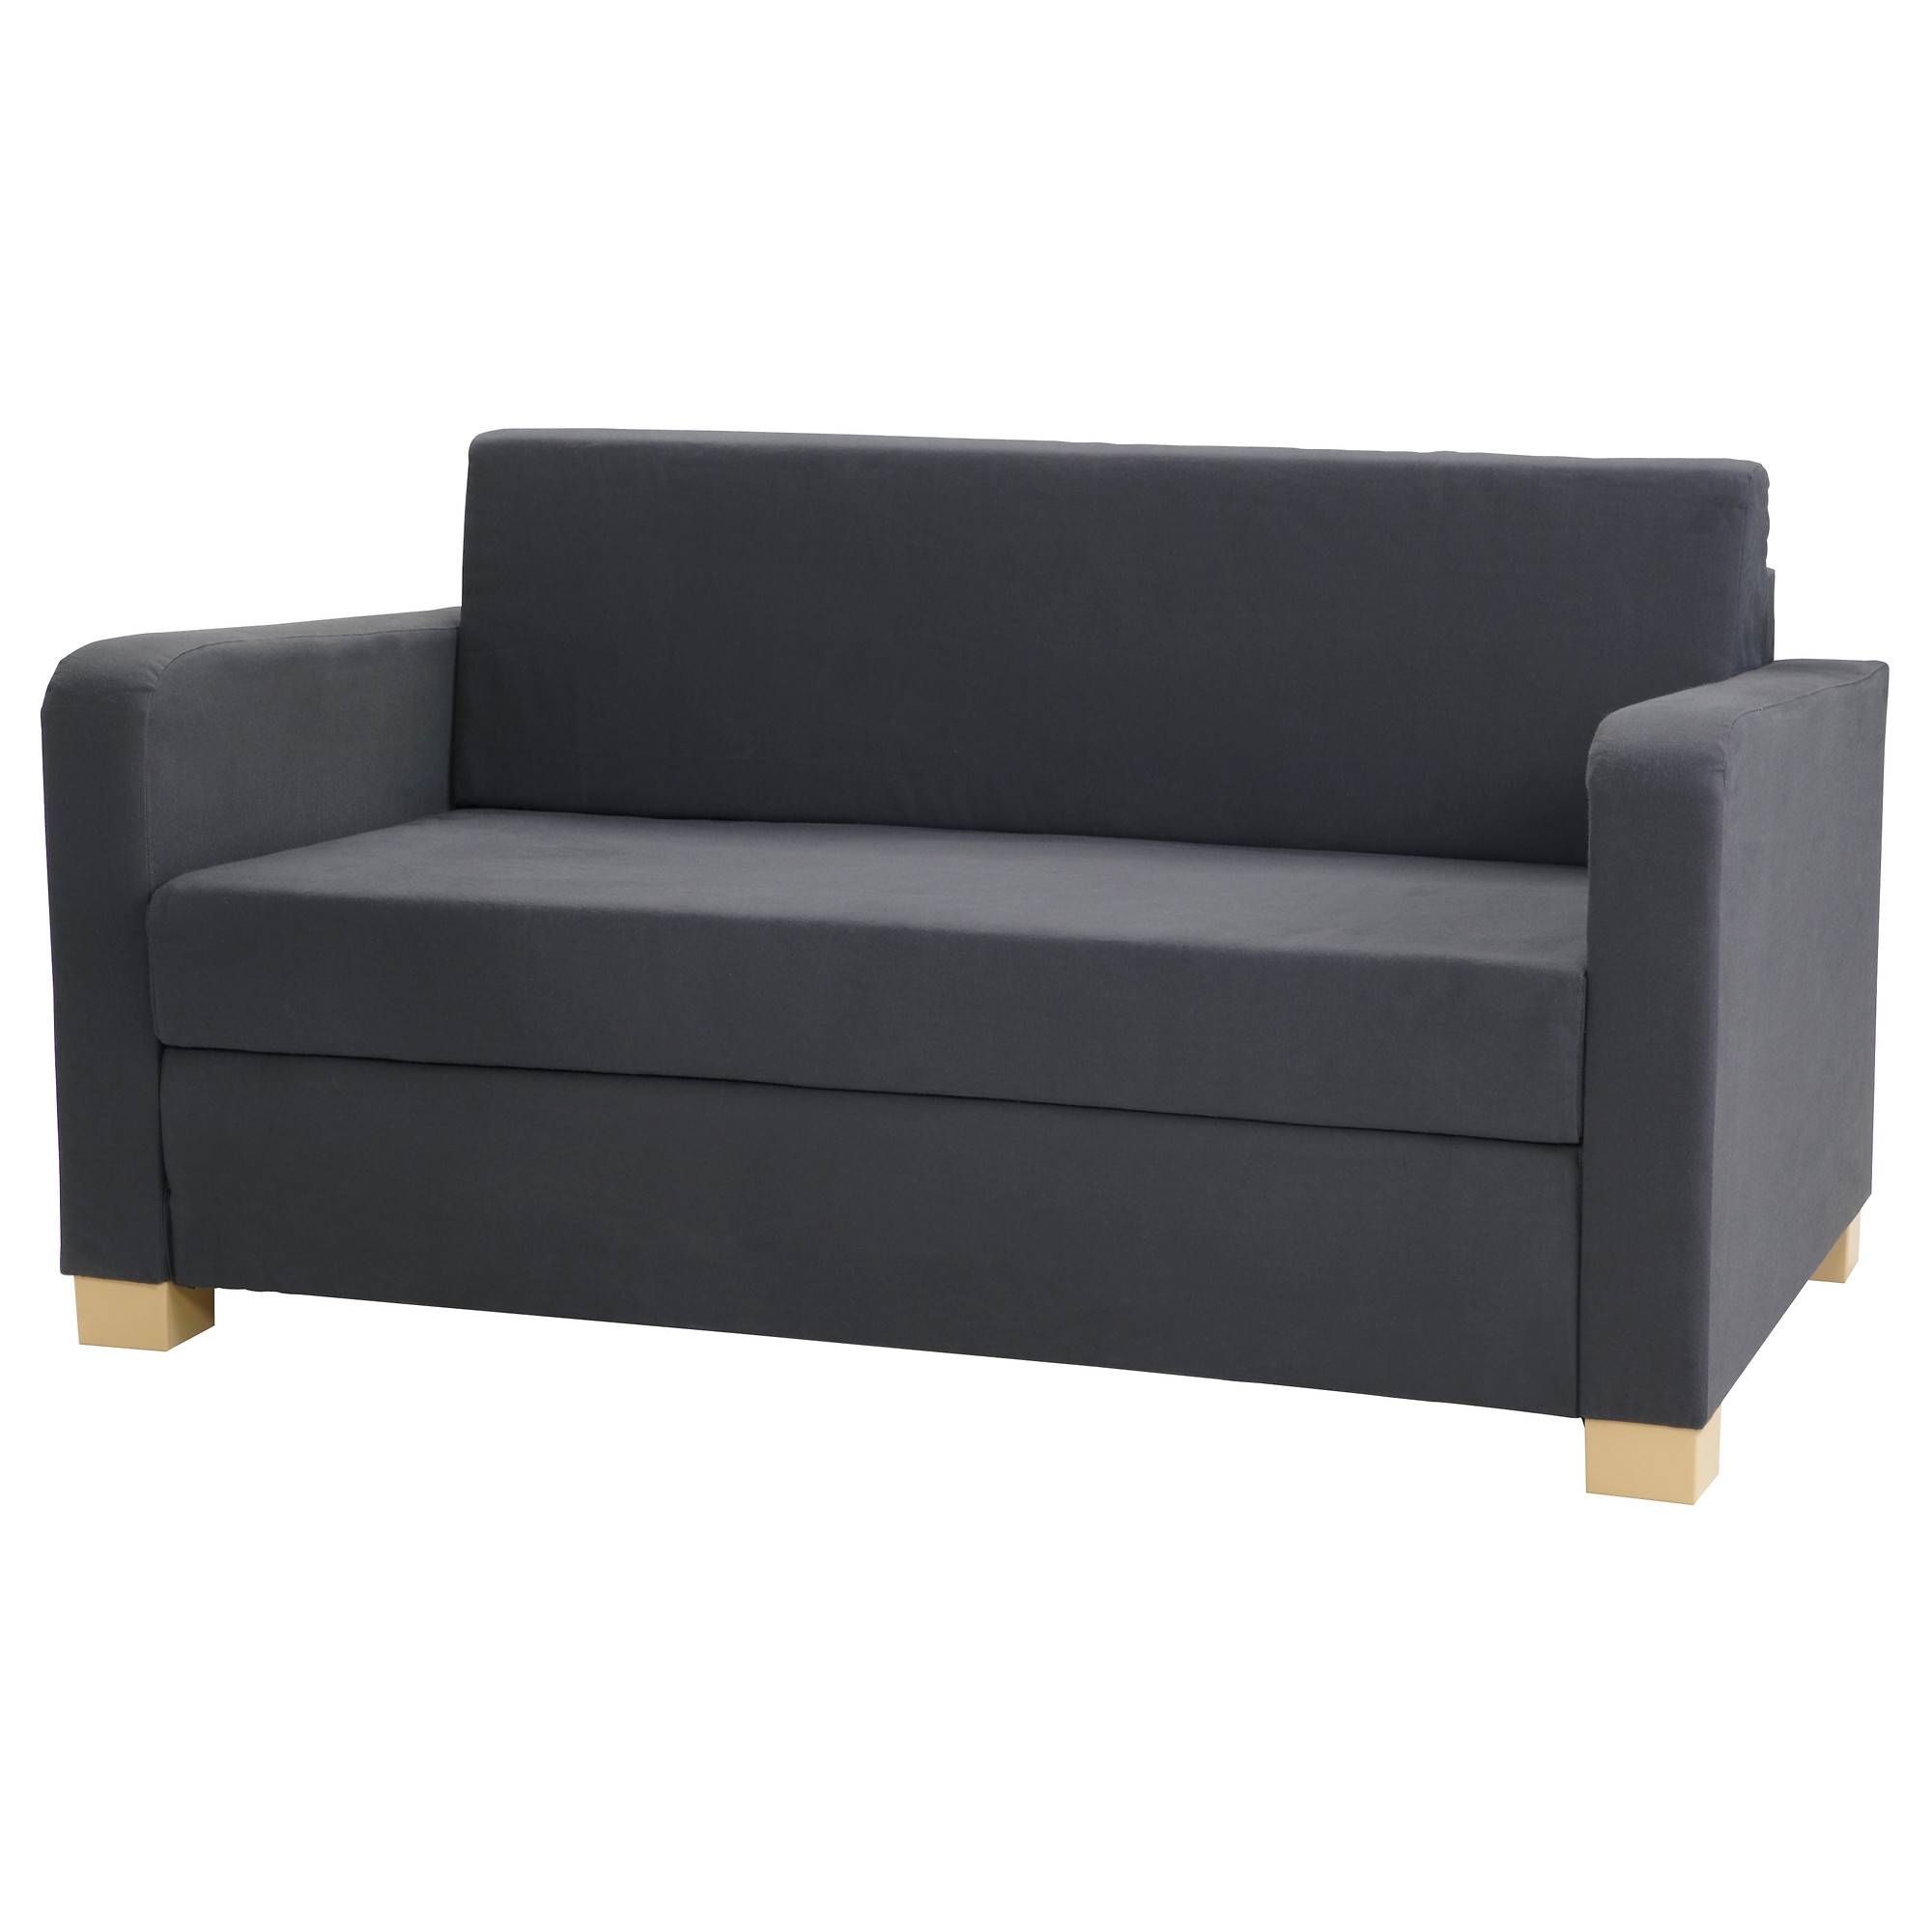 Sleeper Sofas & Chair Beds – Ikea Intended For Convertible Sofa Chair Bed (View 11 of 15)